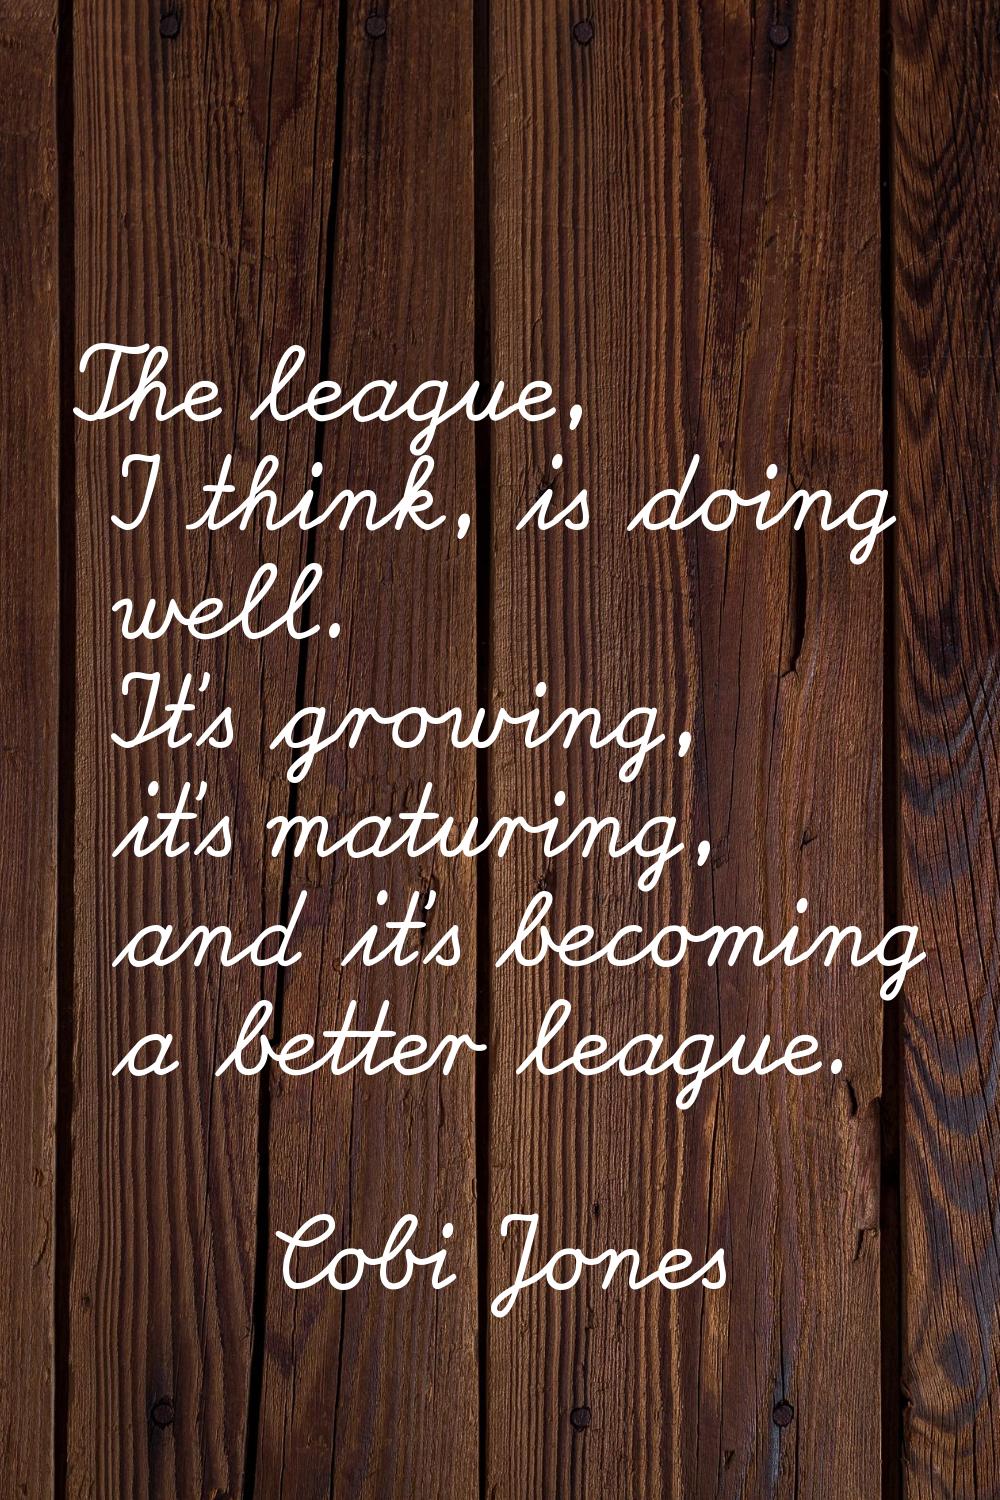 The league, I think, is doing well. It's growing, it's maturing, and it's becoming a better league.